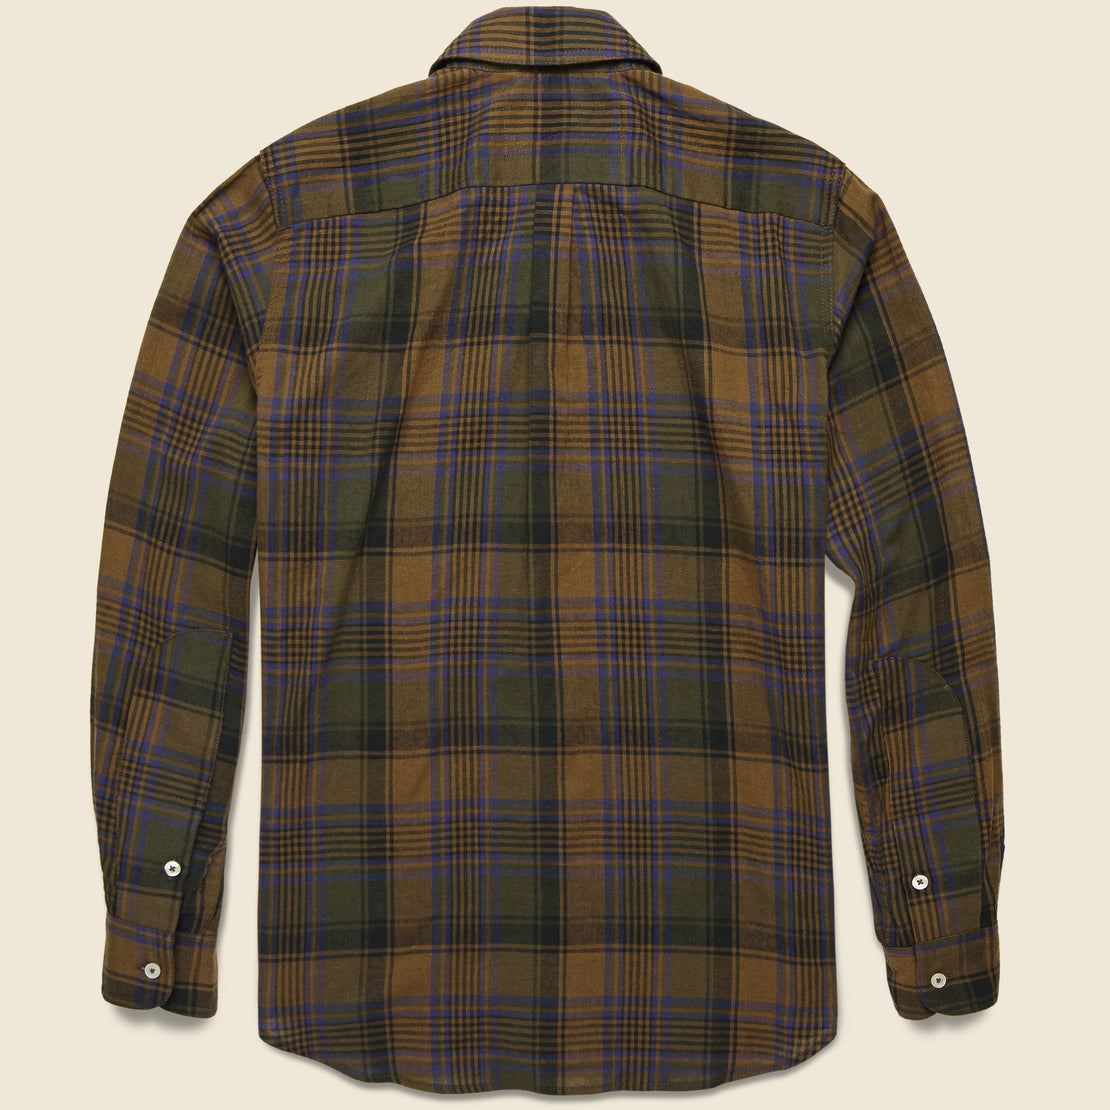 Jumper Plaid Shirt - Brown - Rogue Territory - STAG Provisions - Tops - L/S Woven - Plaid